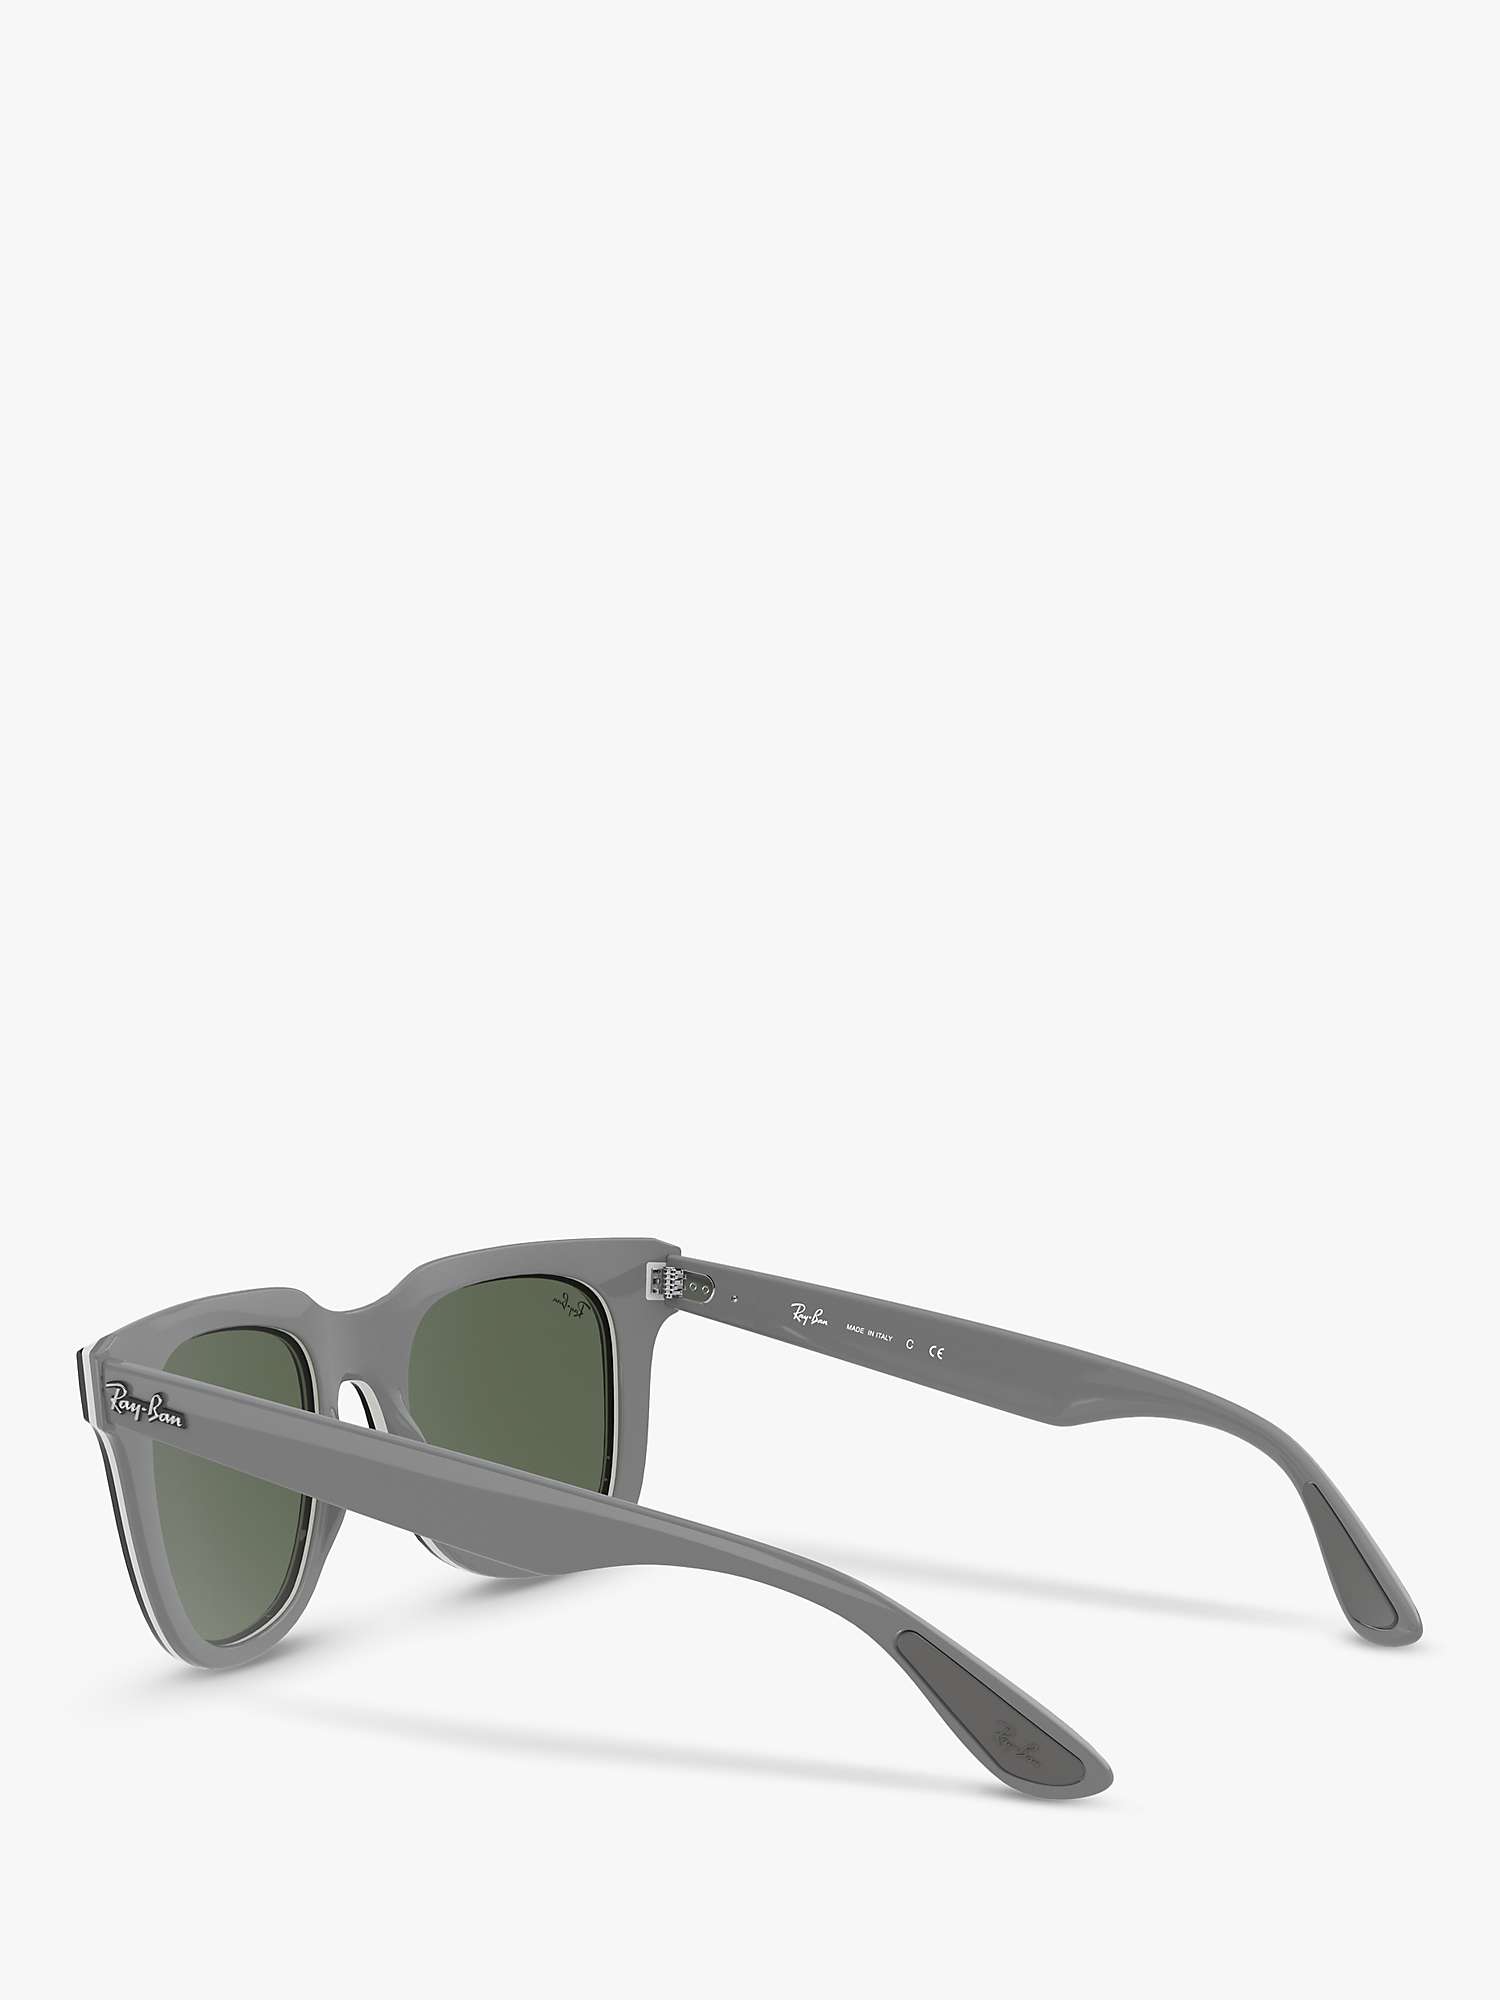 Buy Ray-Ban RB4368 Unisex Square Sunglasses Online at johnlewis.com